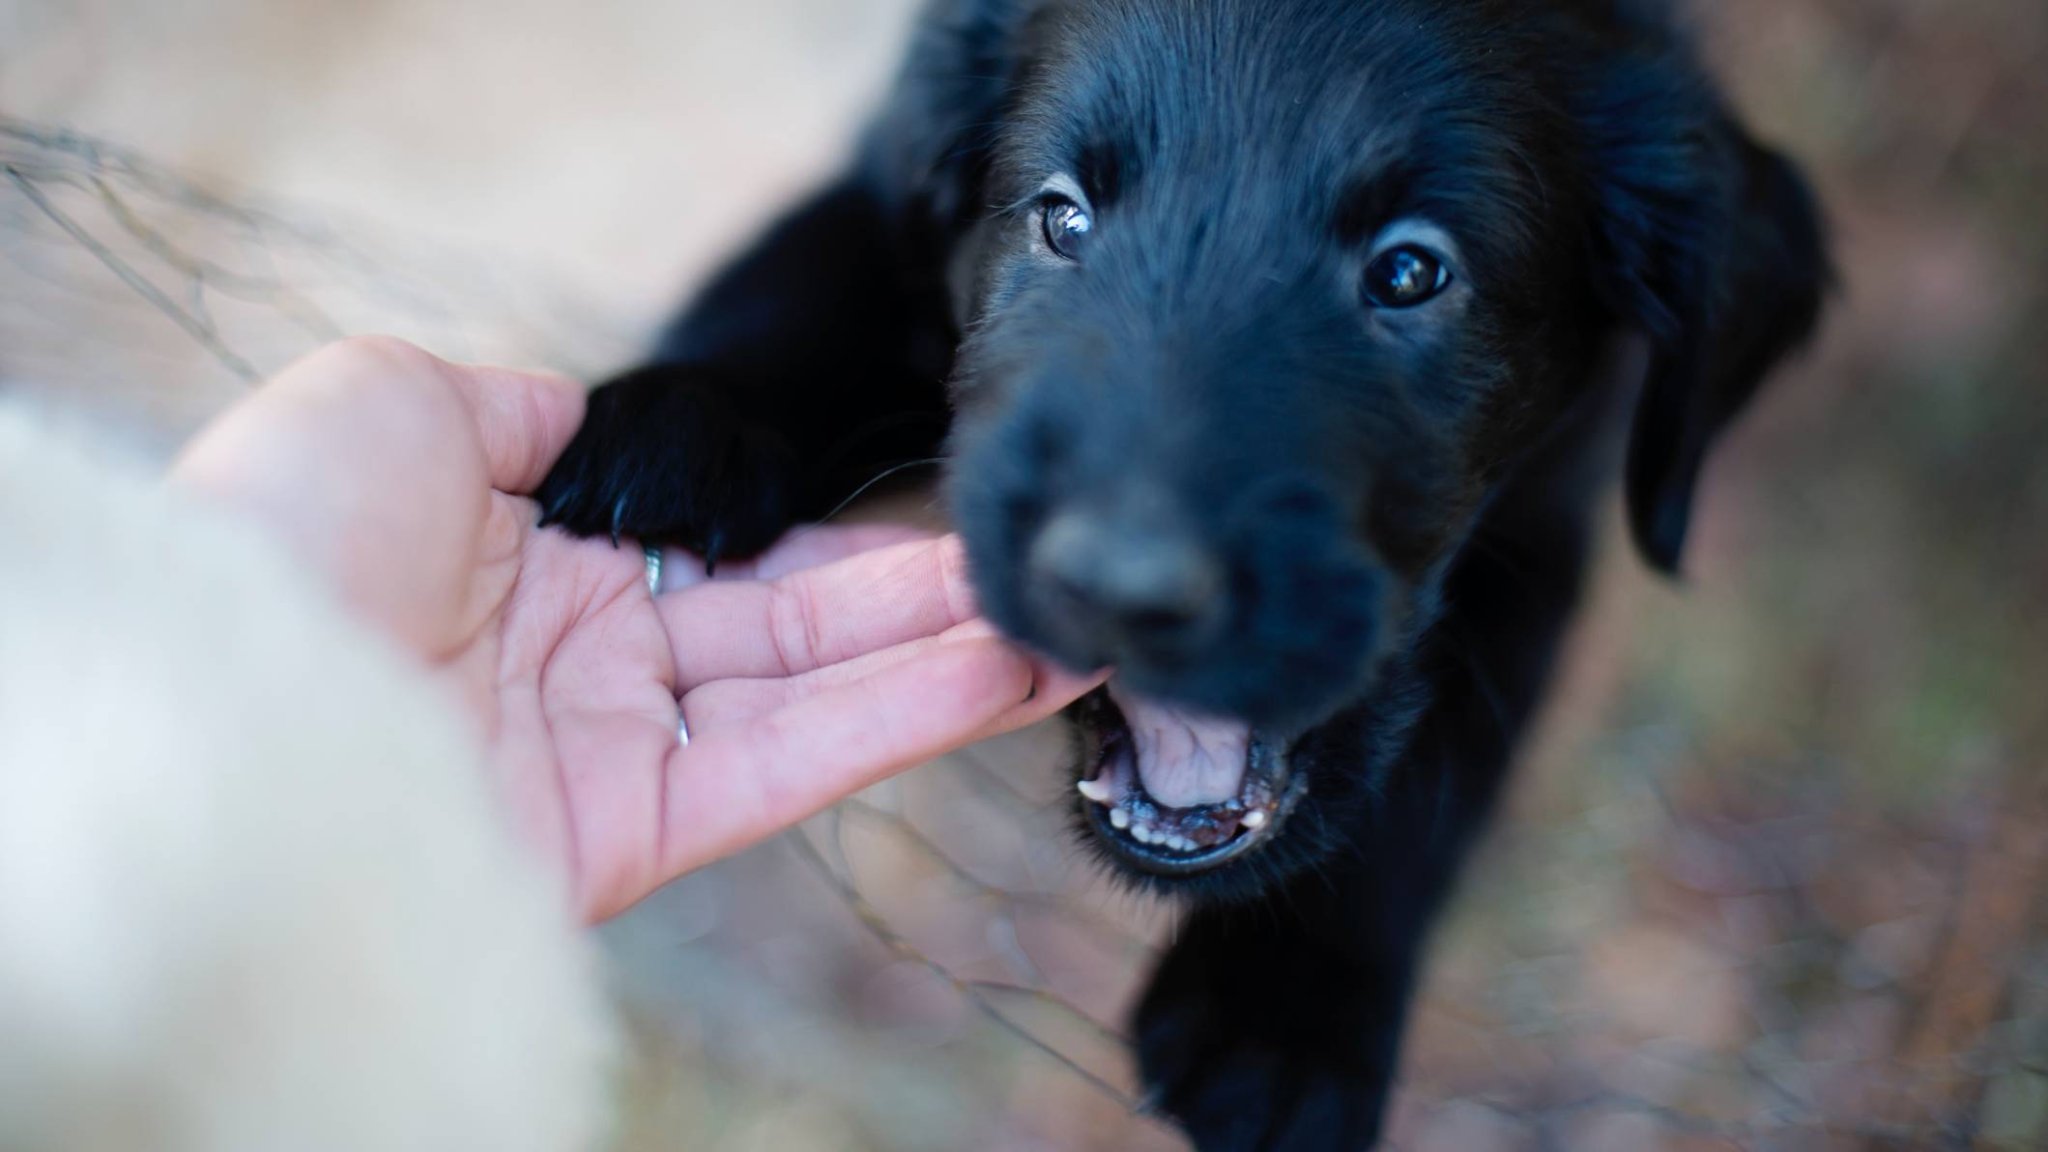 Puppy aggression: Is it play or aggression?